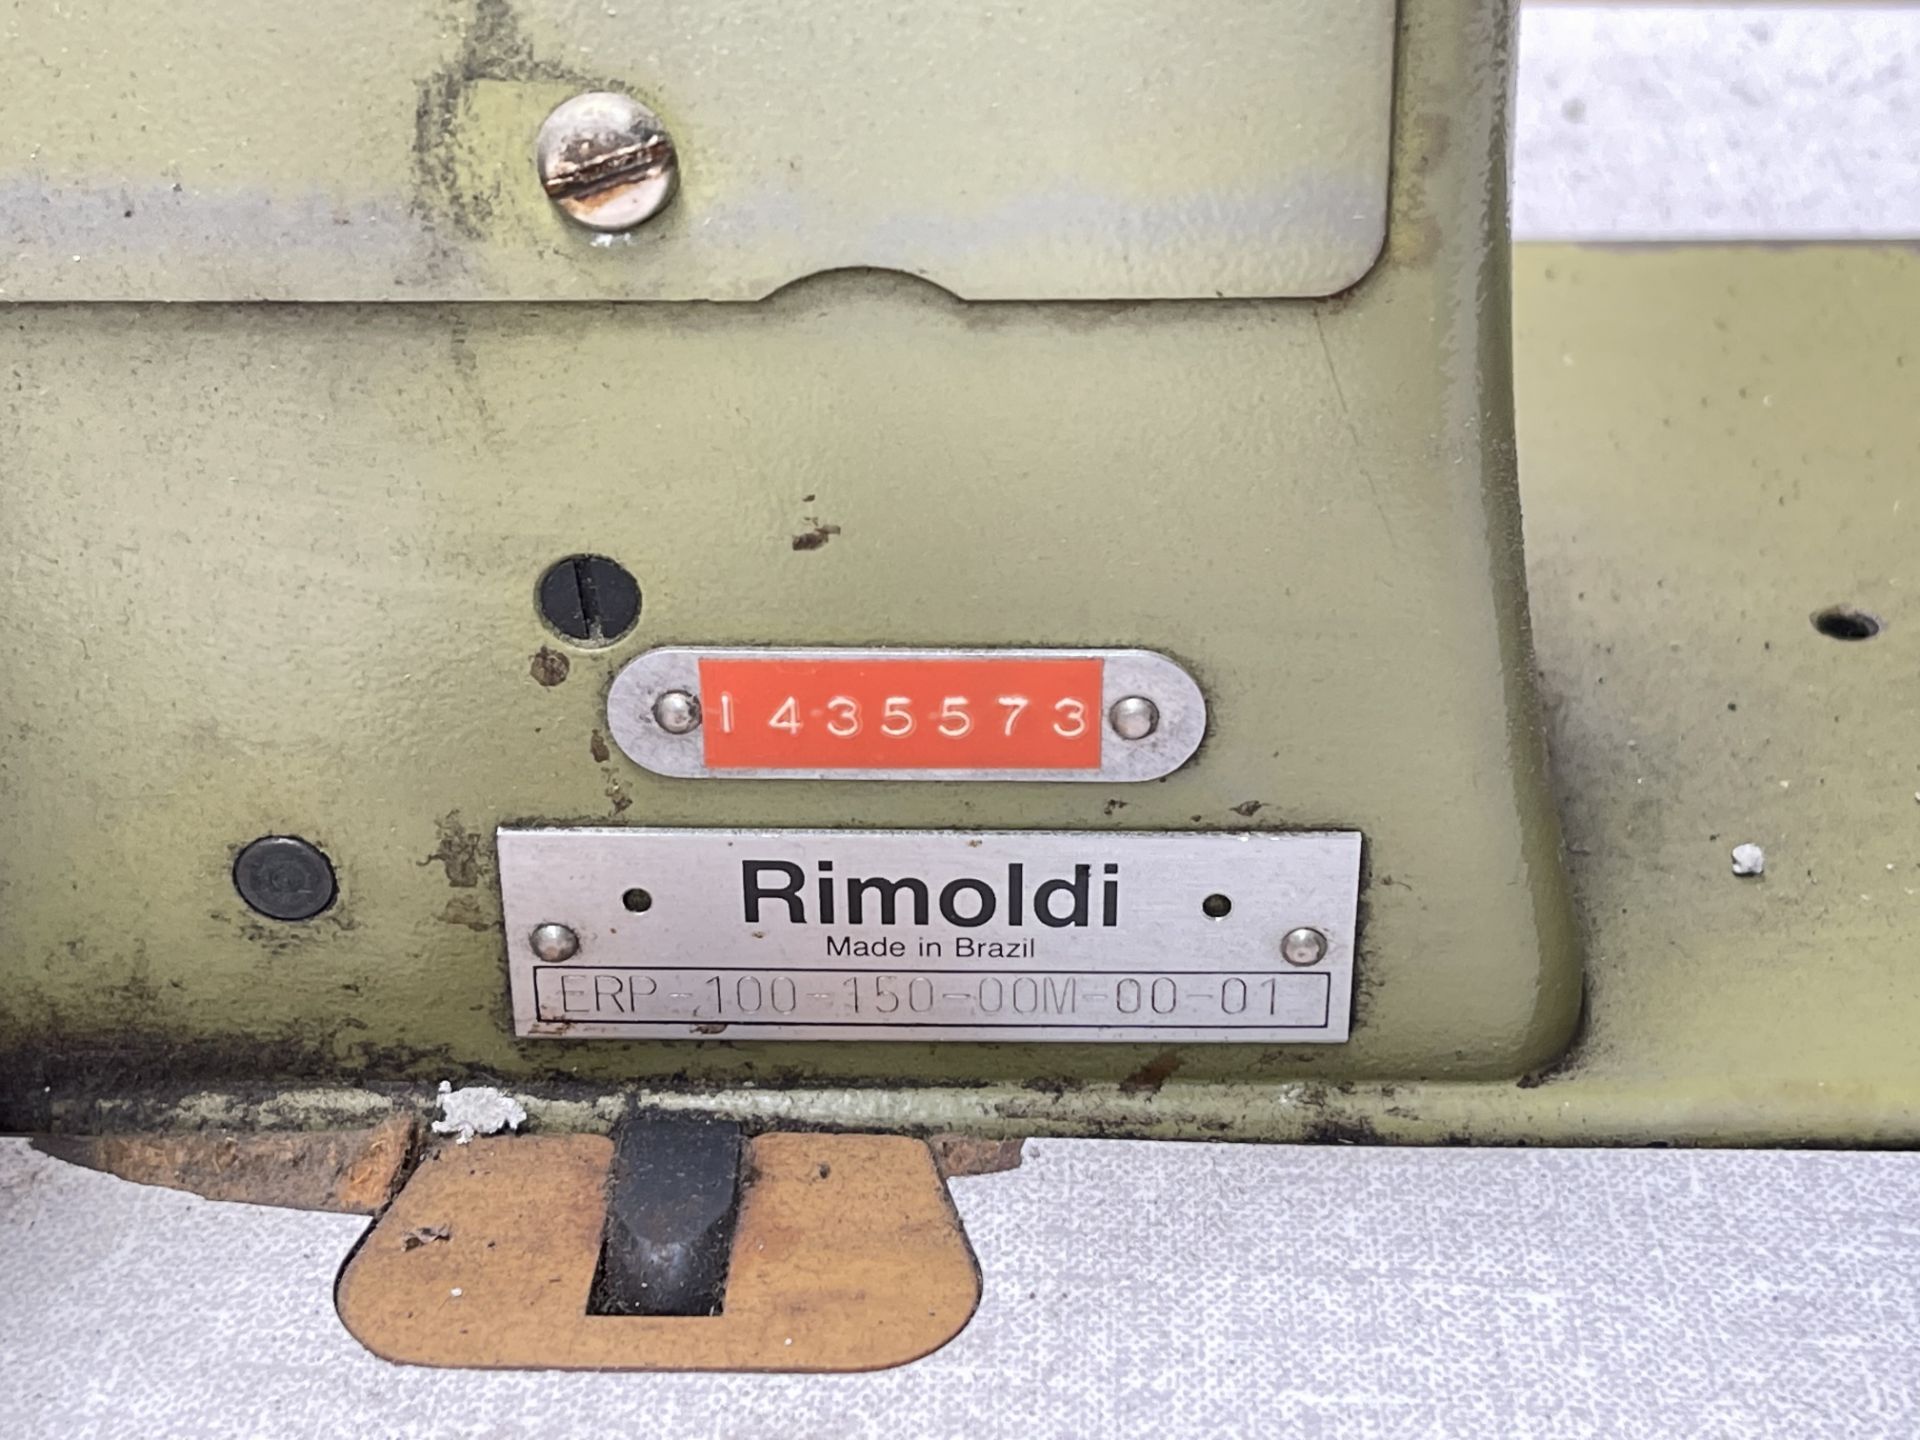 Rimoldi ERP-100-150-00M-00-01 Industrial Sewing machine. S/No 1435573 - Image 9 of 9